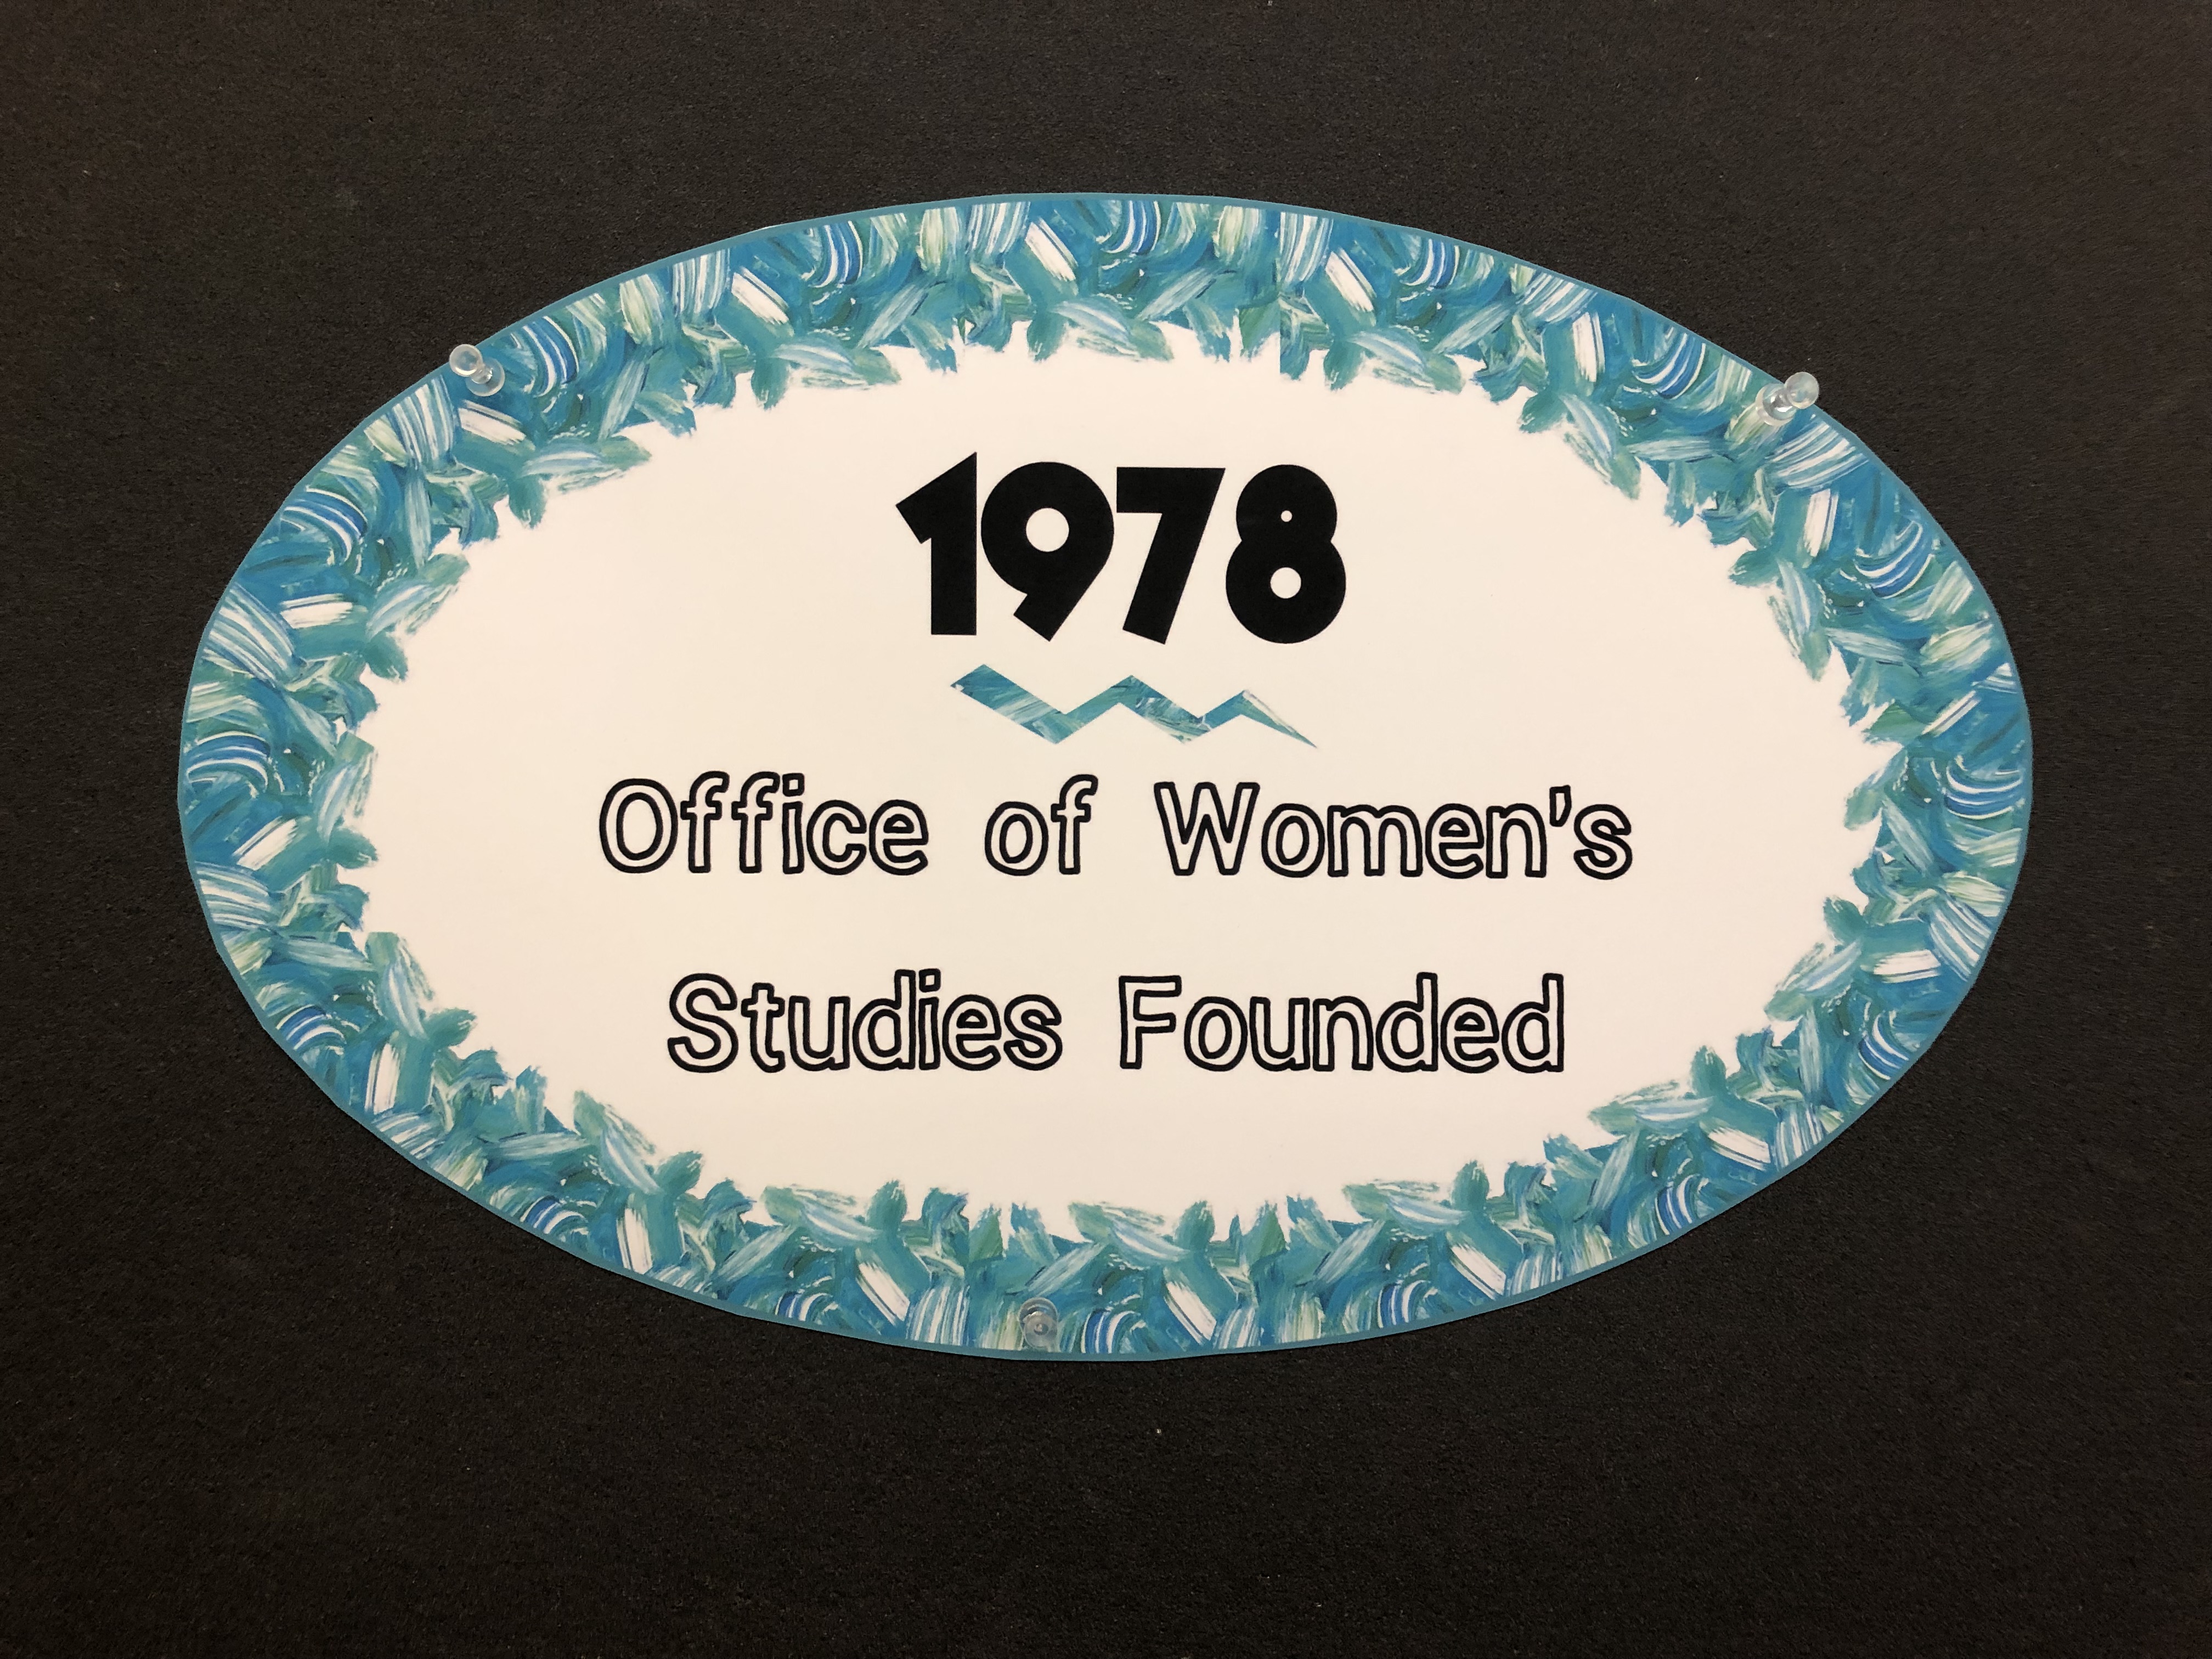 Office of Women's Studies Founded